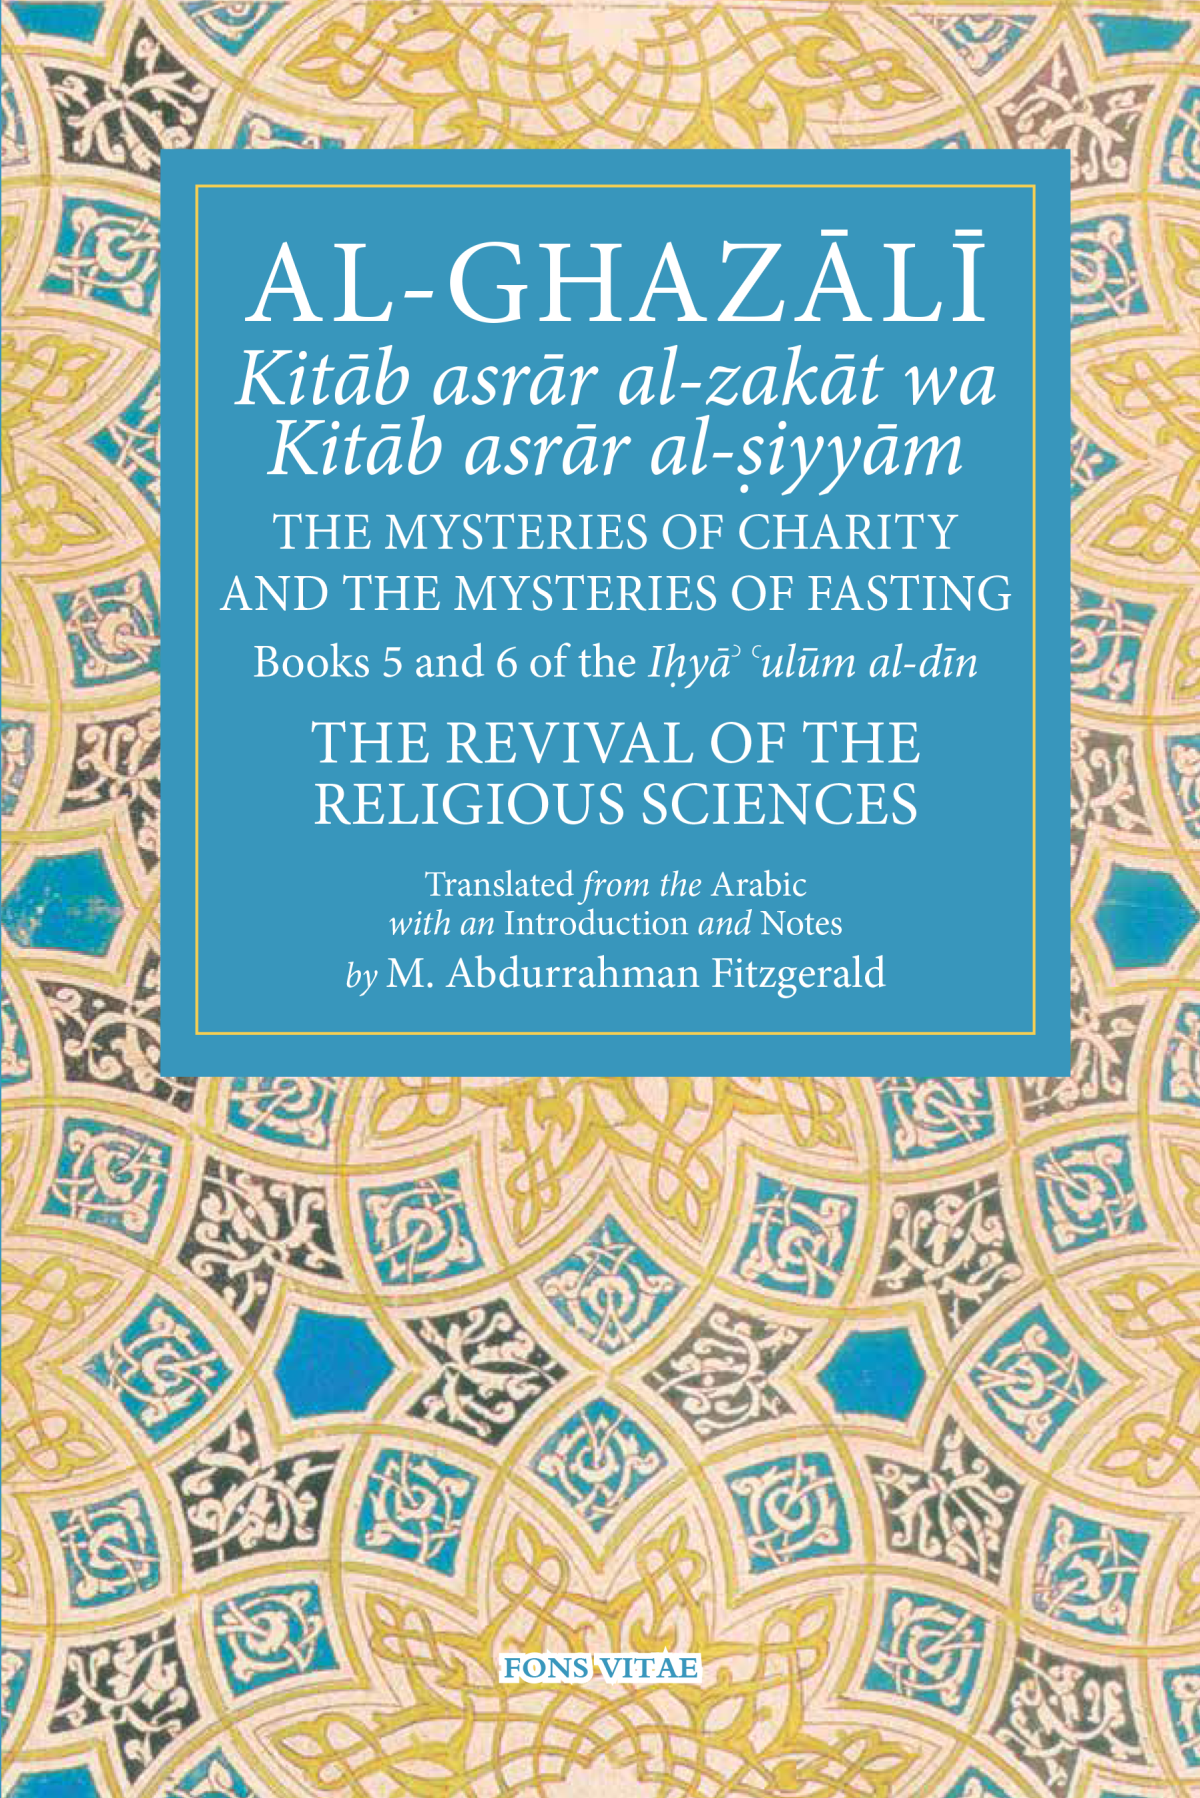 Ghazali Book Set 5 & 6: The Mysteries of Charity & Fasting - Adult